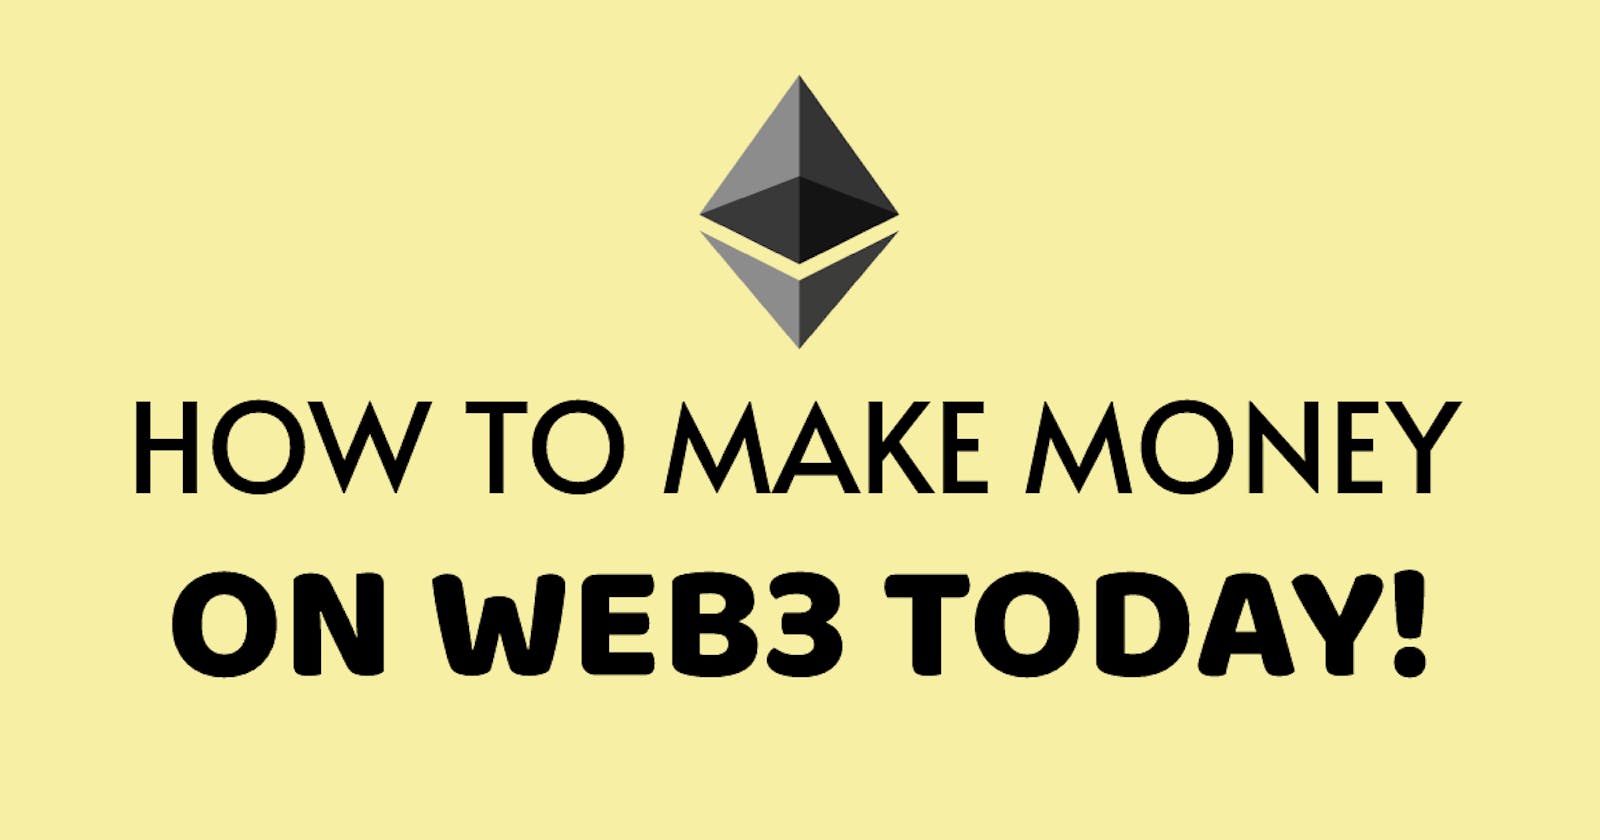 How To Make Money On Web3 Today!